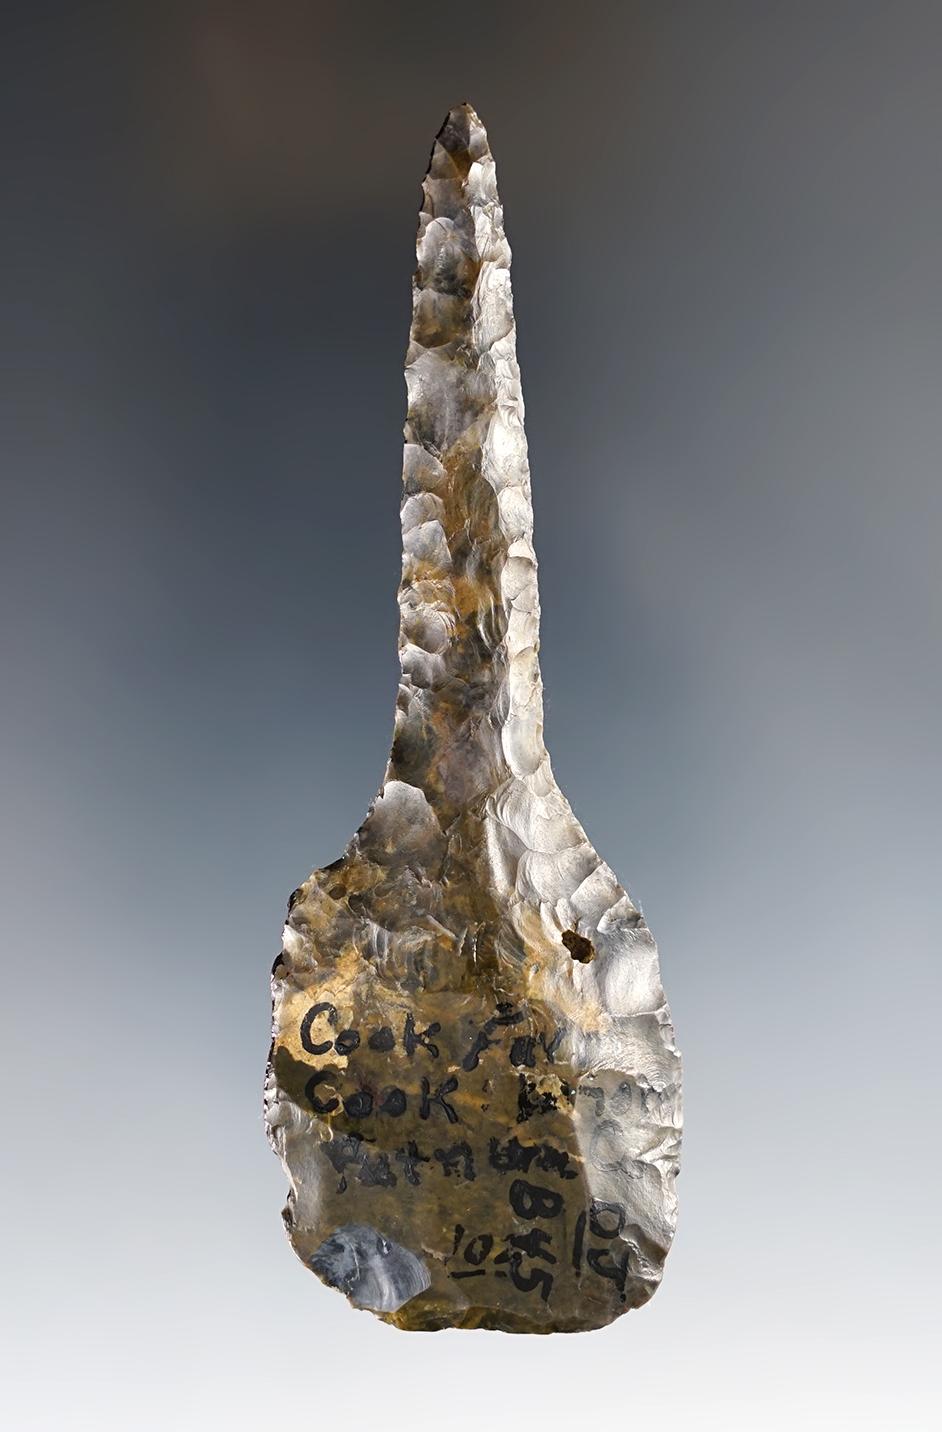 3 15/16" patinated Coshocton Flint Expanded Base Drill - Pickaway Co., OH. Ex. Brook, Johnston.